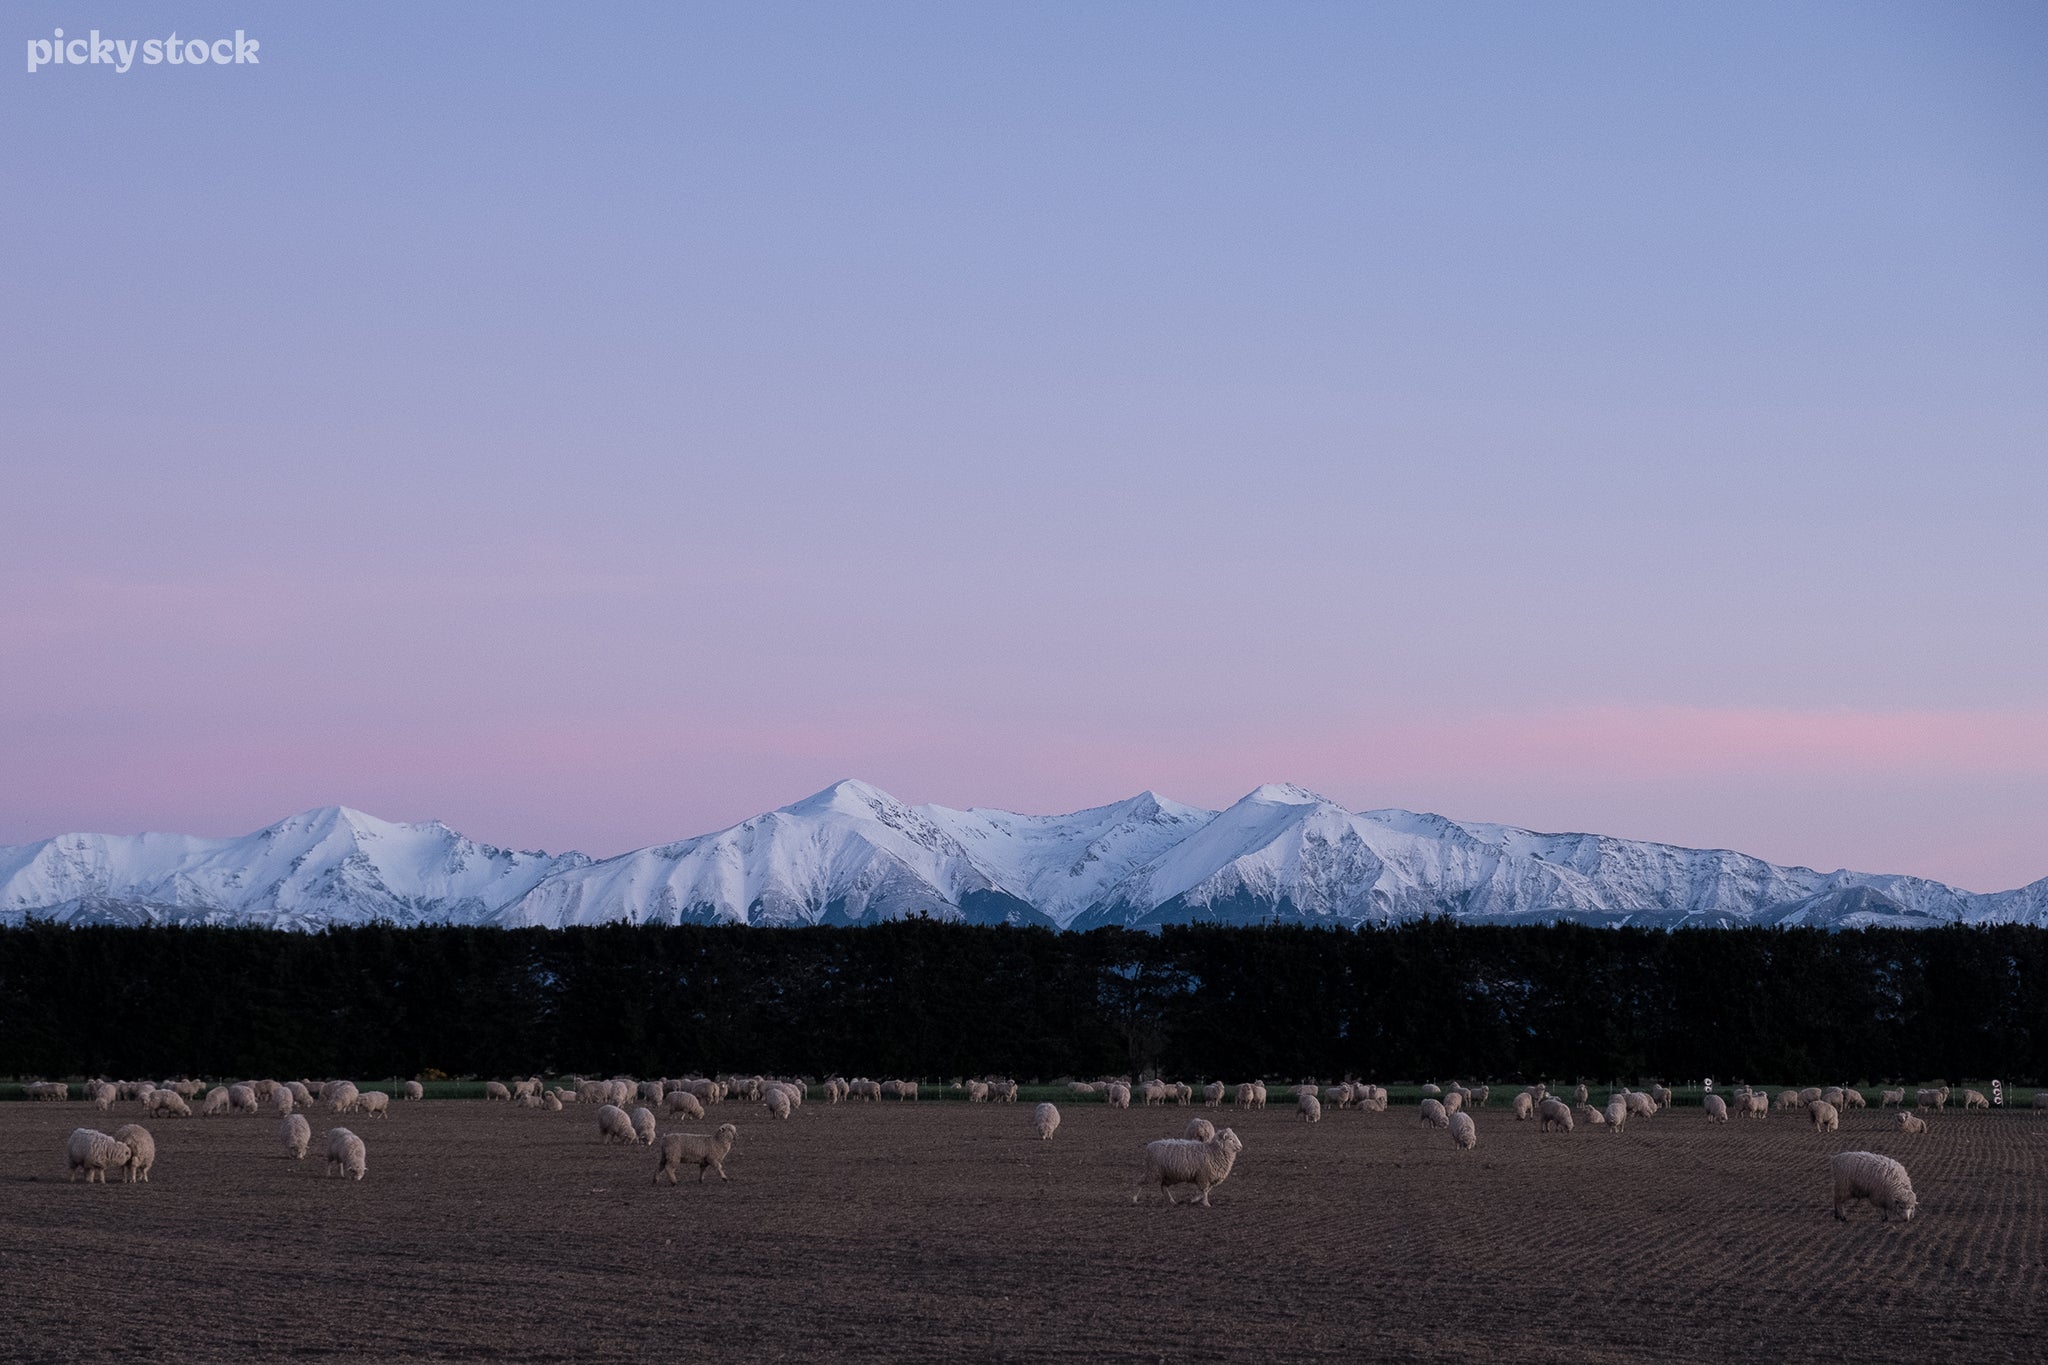 Landscape of a large flock of sheep grazing in a paddock, dark green foliage creates a natural fence line while the background is overwhelmed by a large snowy mountain range under a lilac sky.